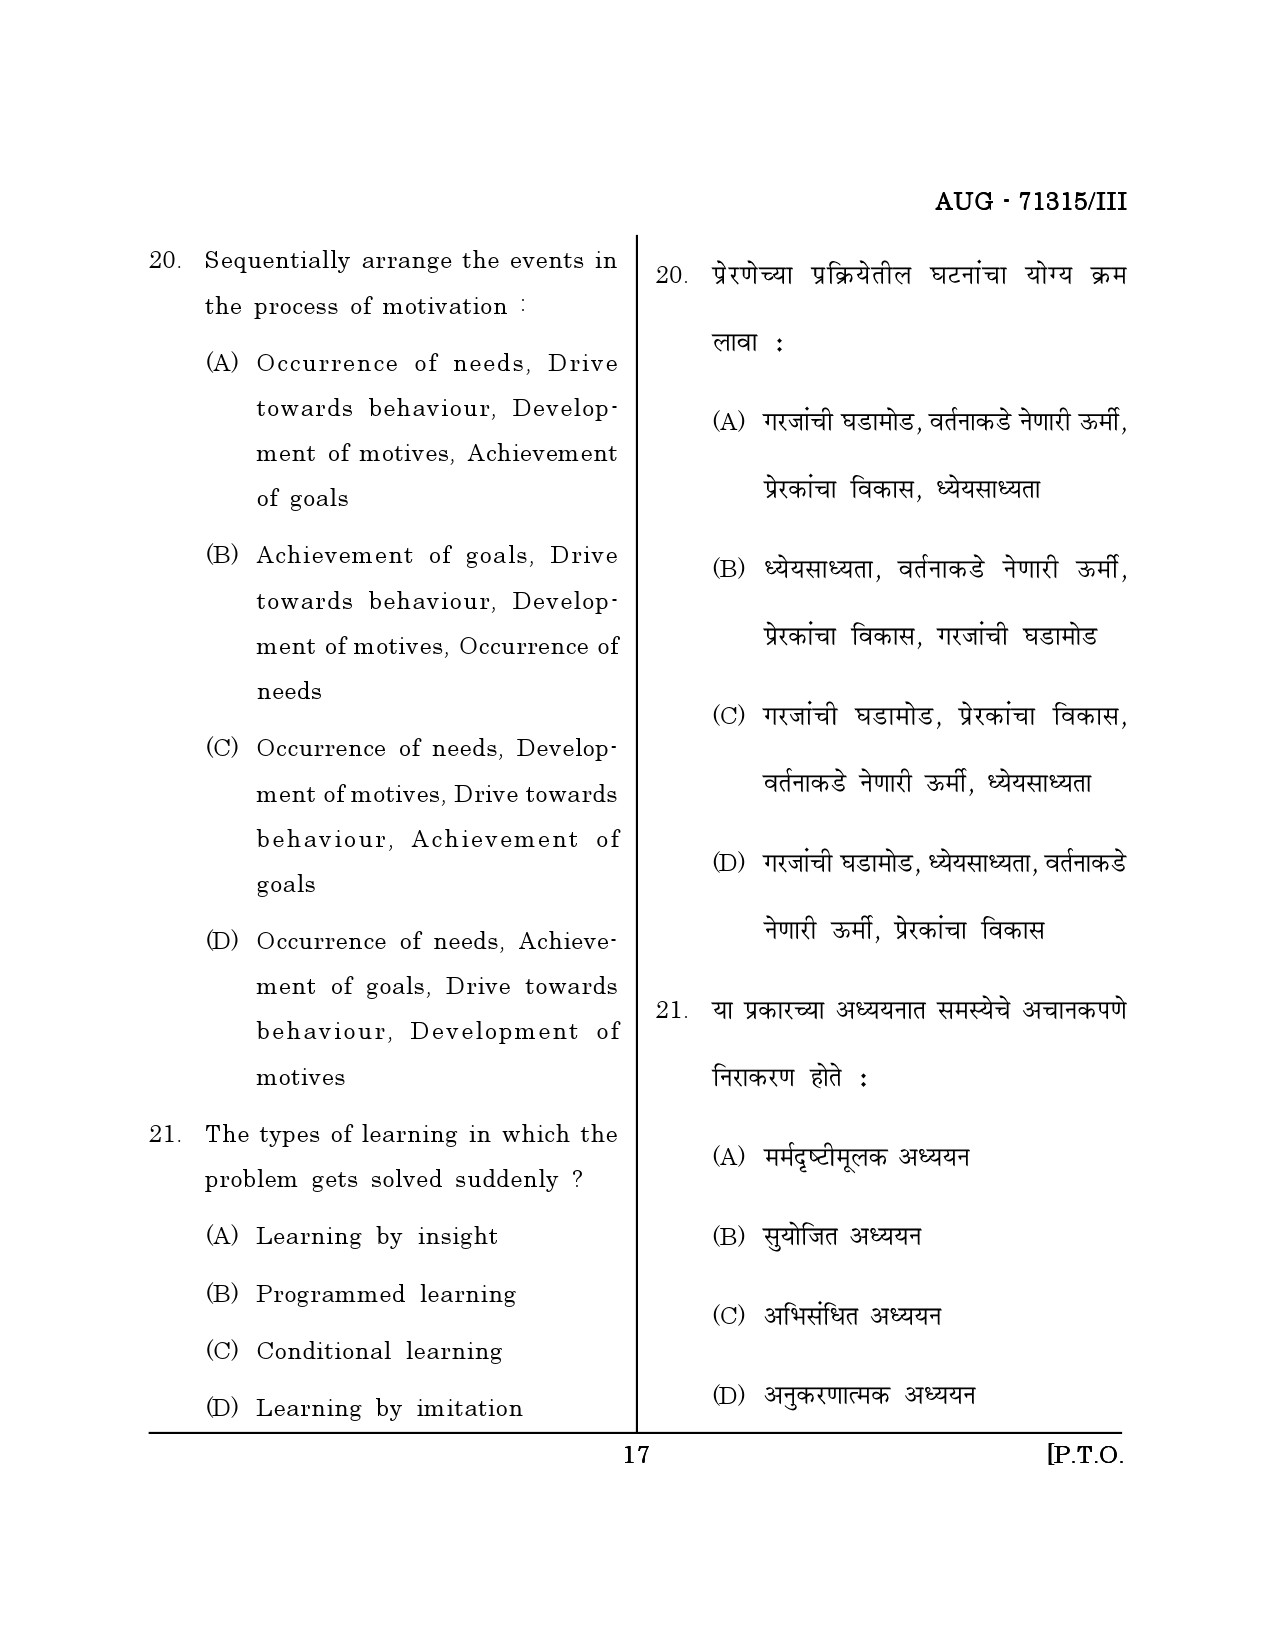 Maharashtra SET Physical Education Question Paper III August 2015 16